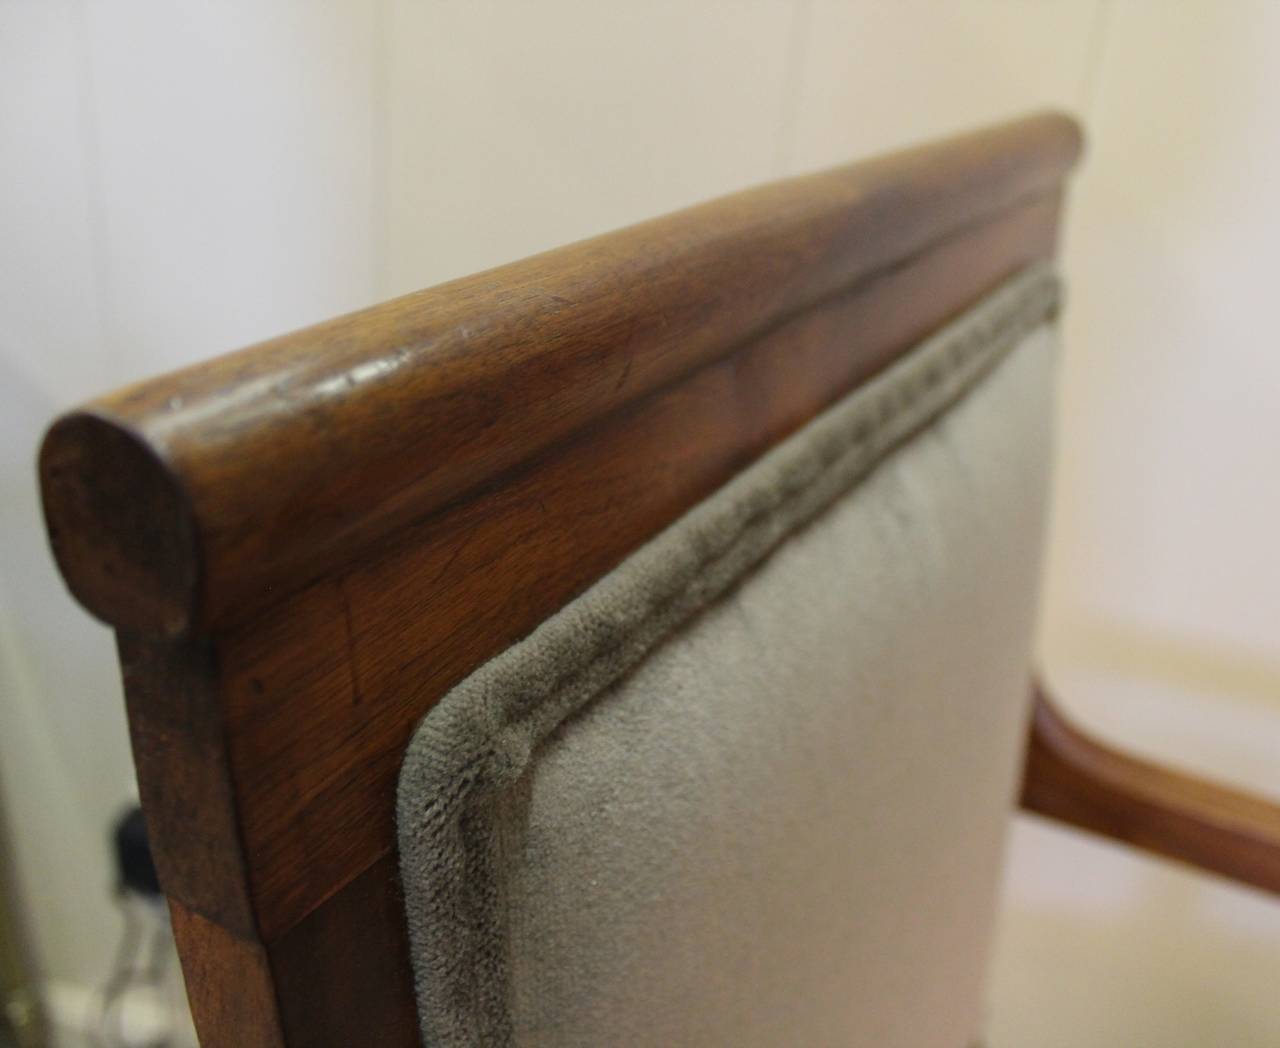 Newly upholstered in gray velvet, beautiful patina, great style.